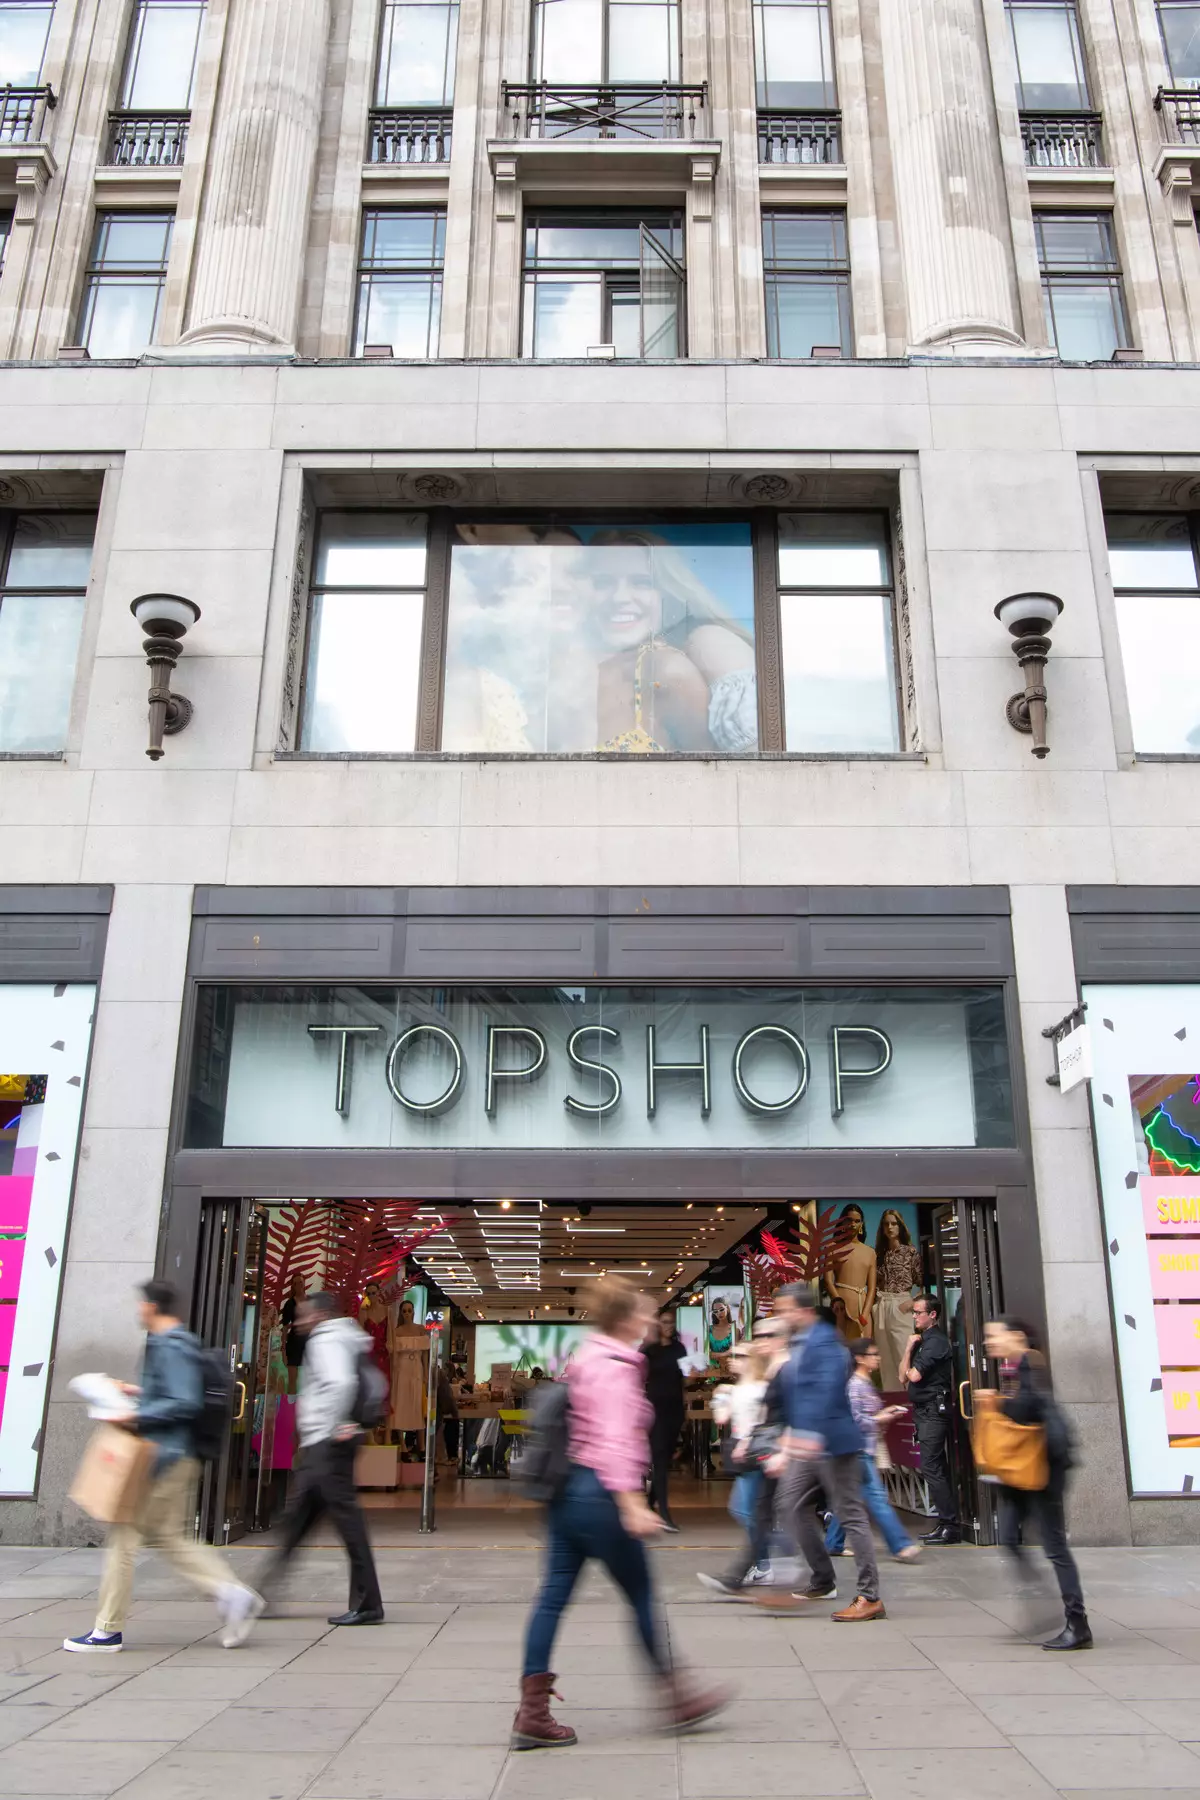 The Topshop is infamous for its vast size (